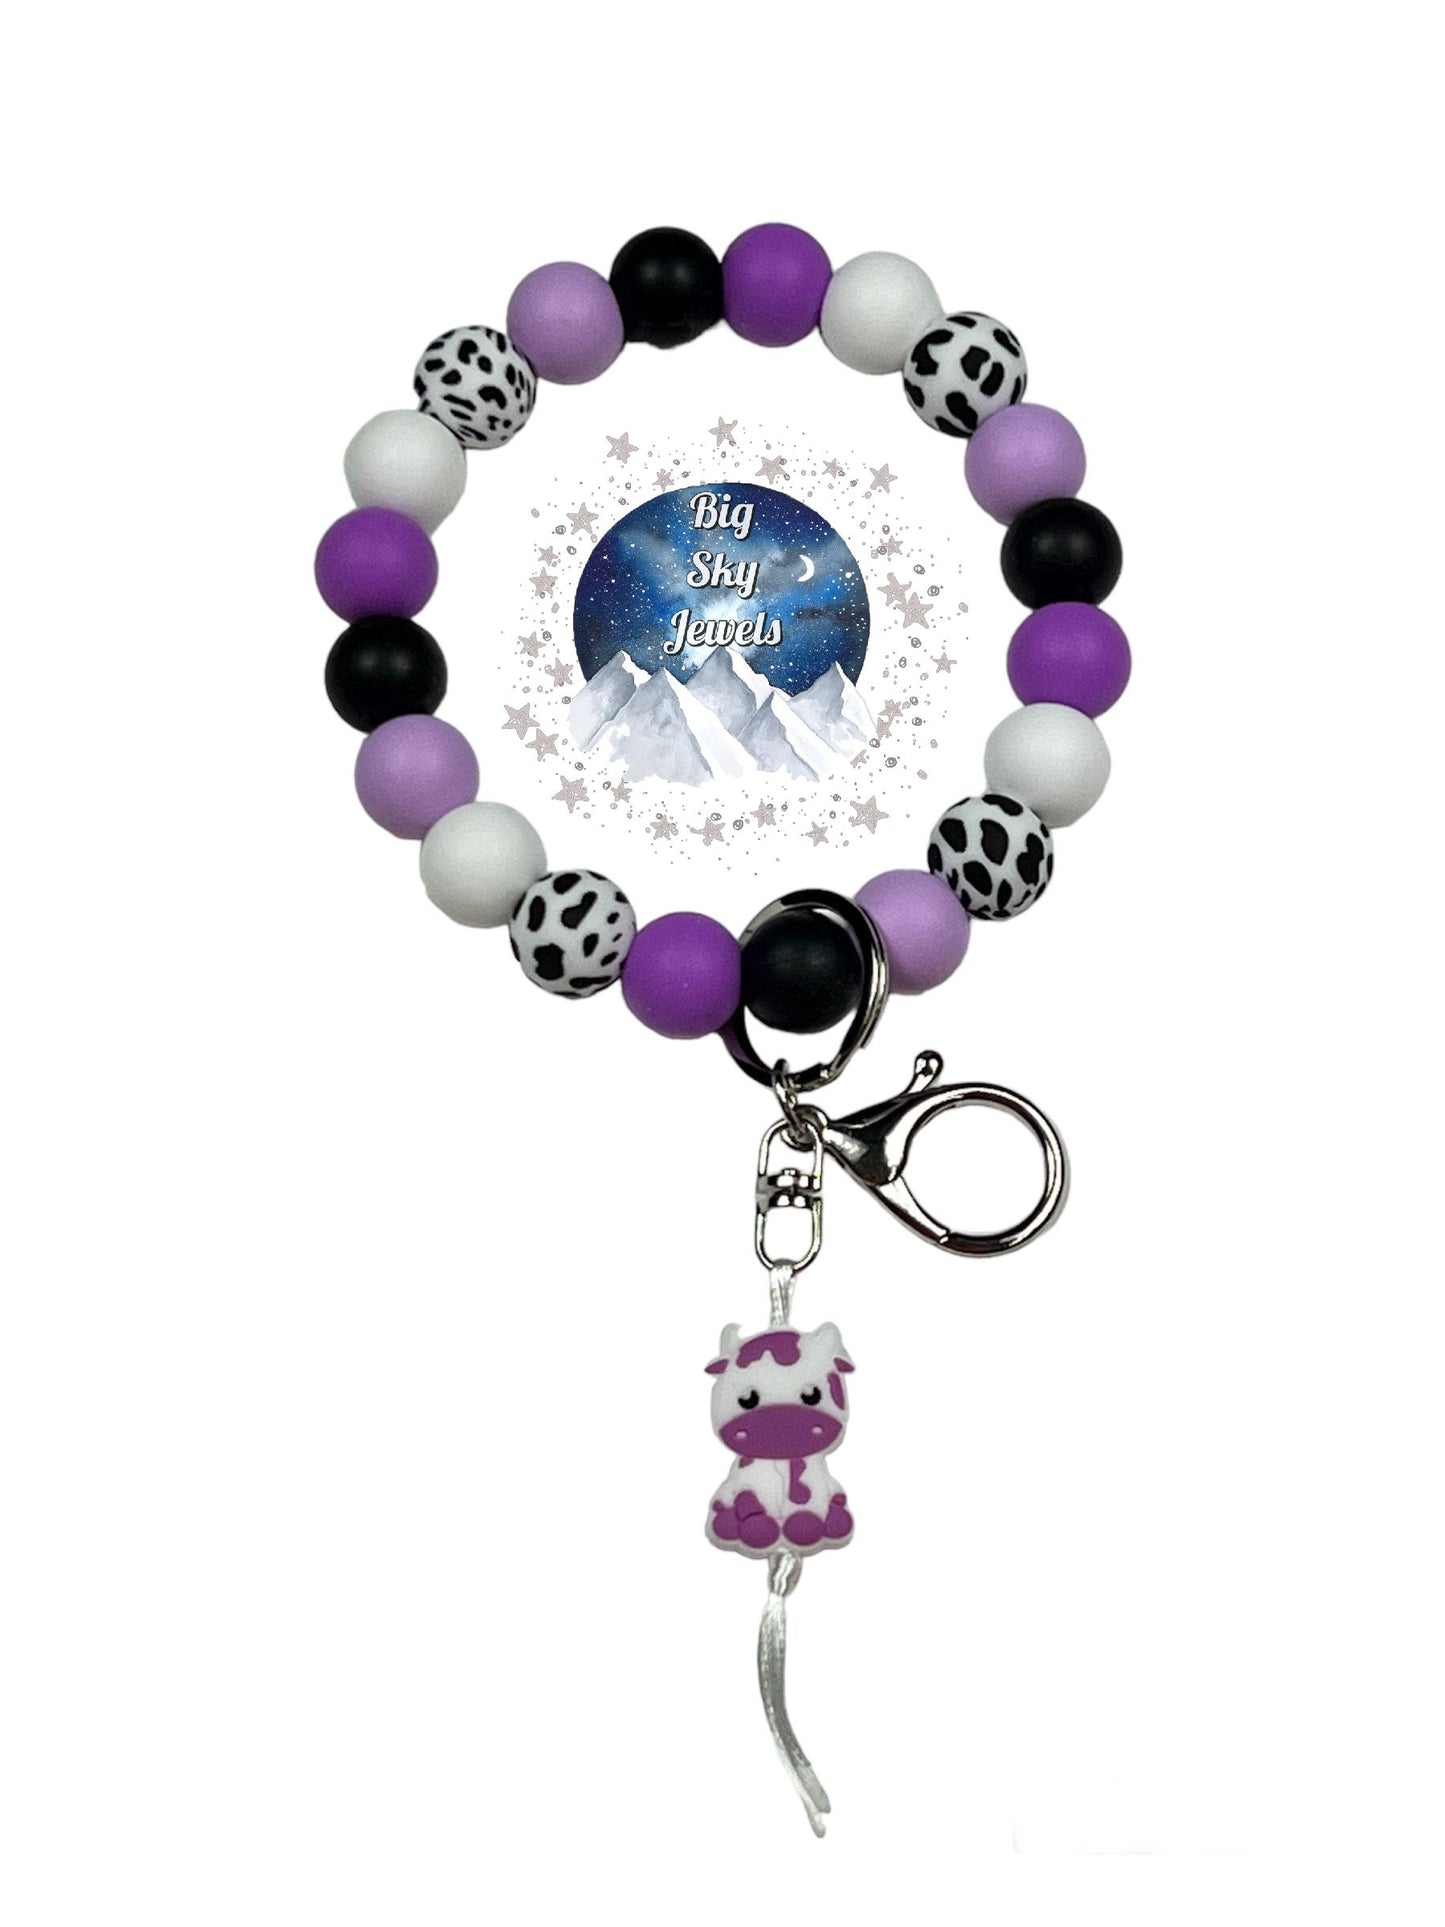 Dottie the Cow Wristlet Keychain Design #2 White W/ Black Cow Print Silicone Cow Print Beads, Black, Lavender Mist, Lavender Purple and White. Ages 8+ Kids or Ladies Moms Western West